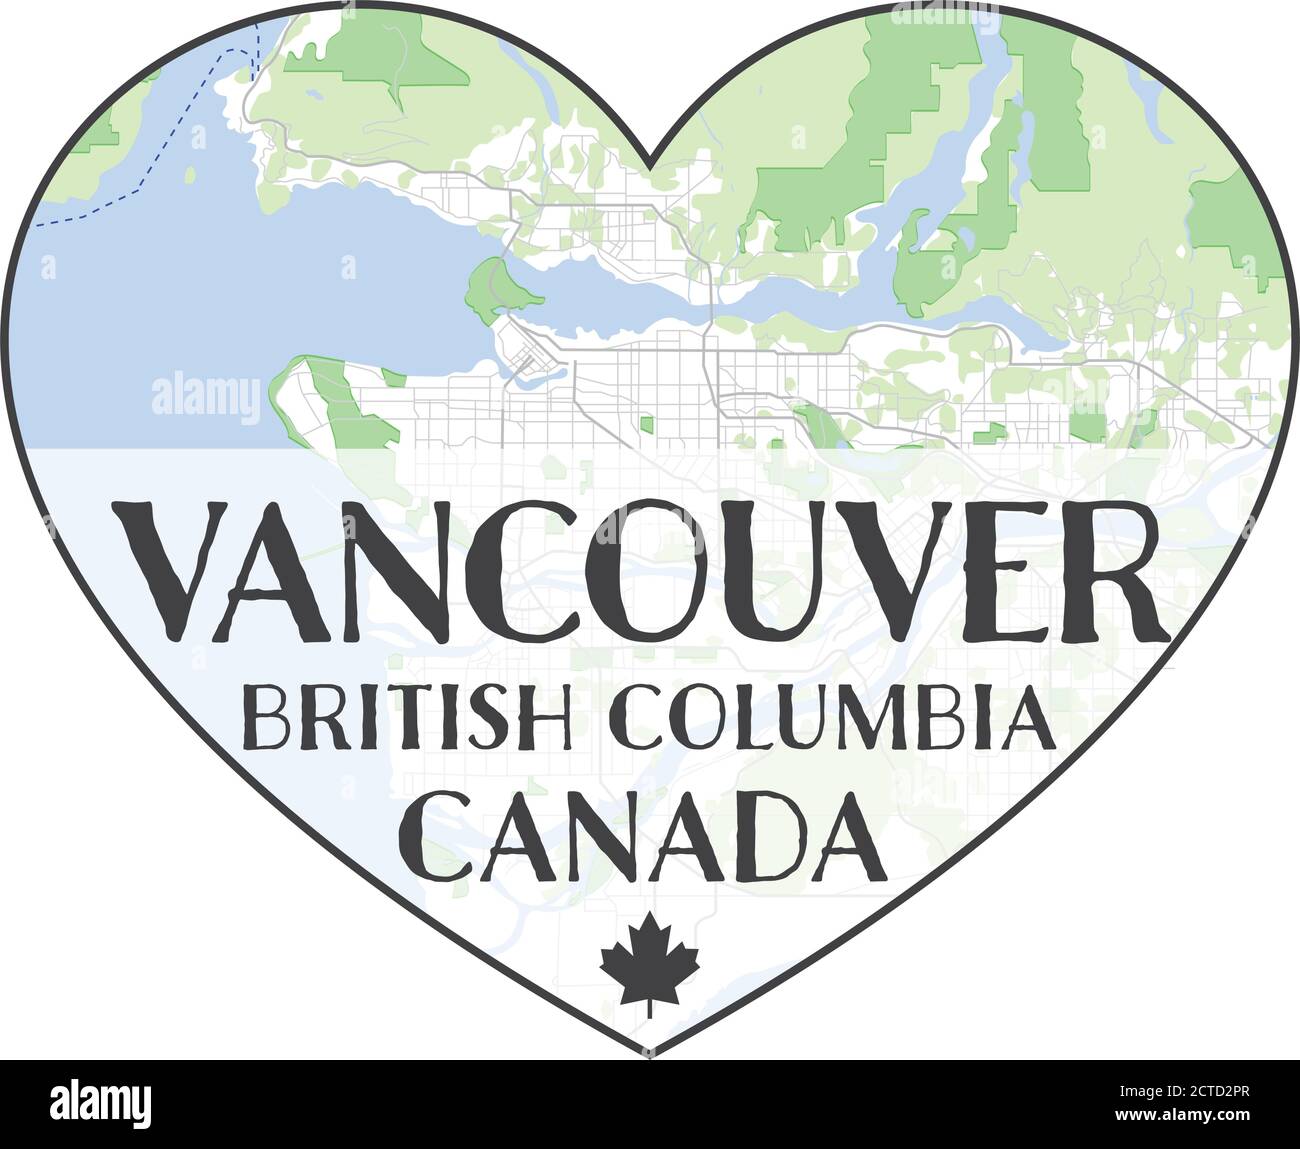 Map of Vancouver inside heart shape. Centered text bellow "Vancouver, British Columbia, Canada". Concept for love and to live in Vancouver. Vector. Stock Vector